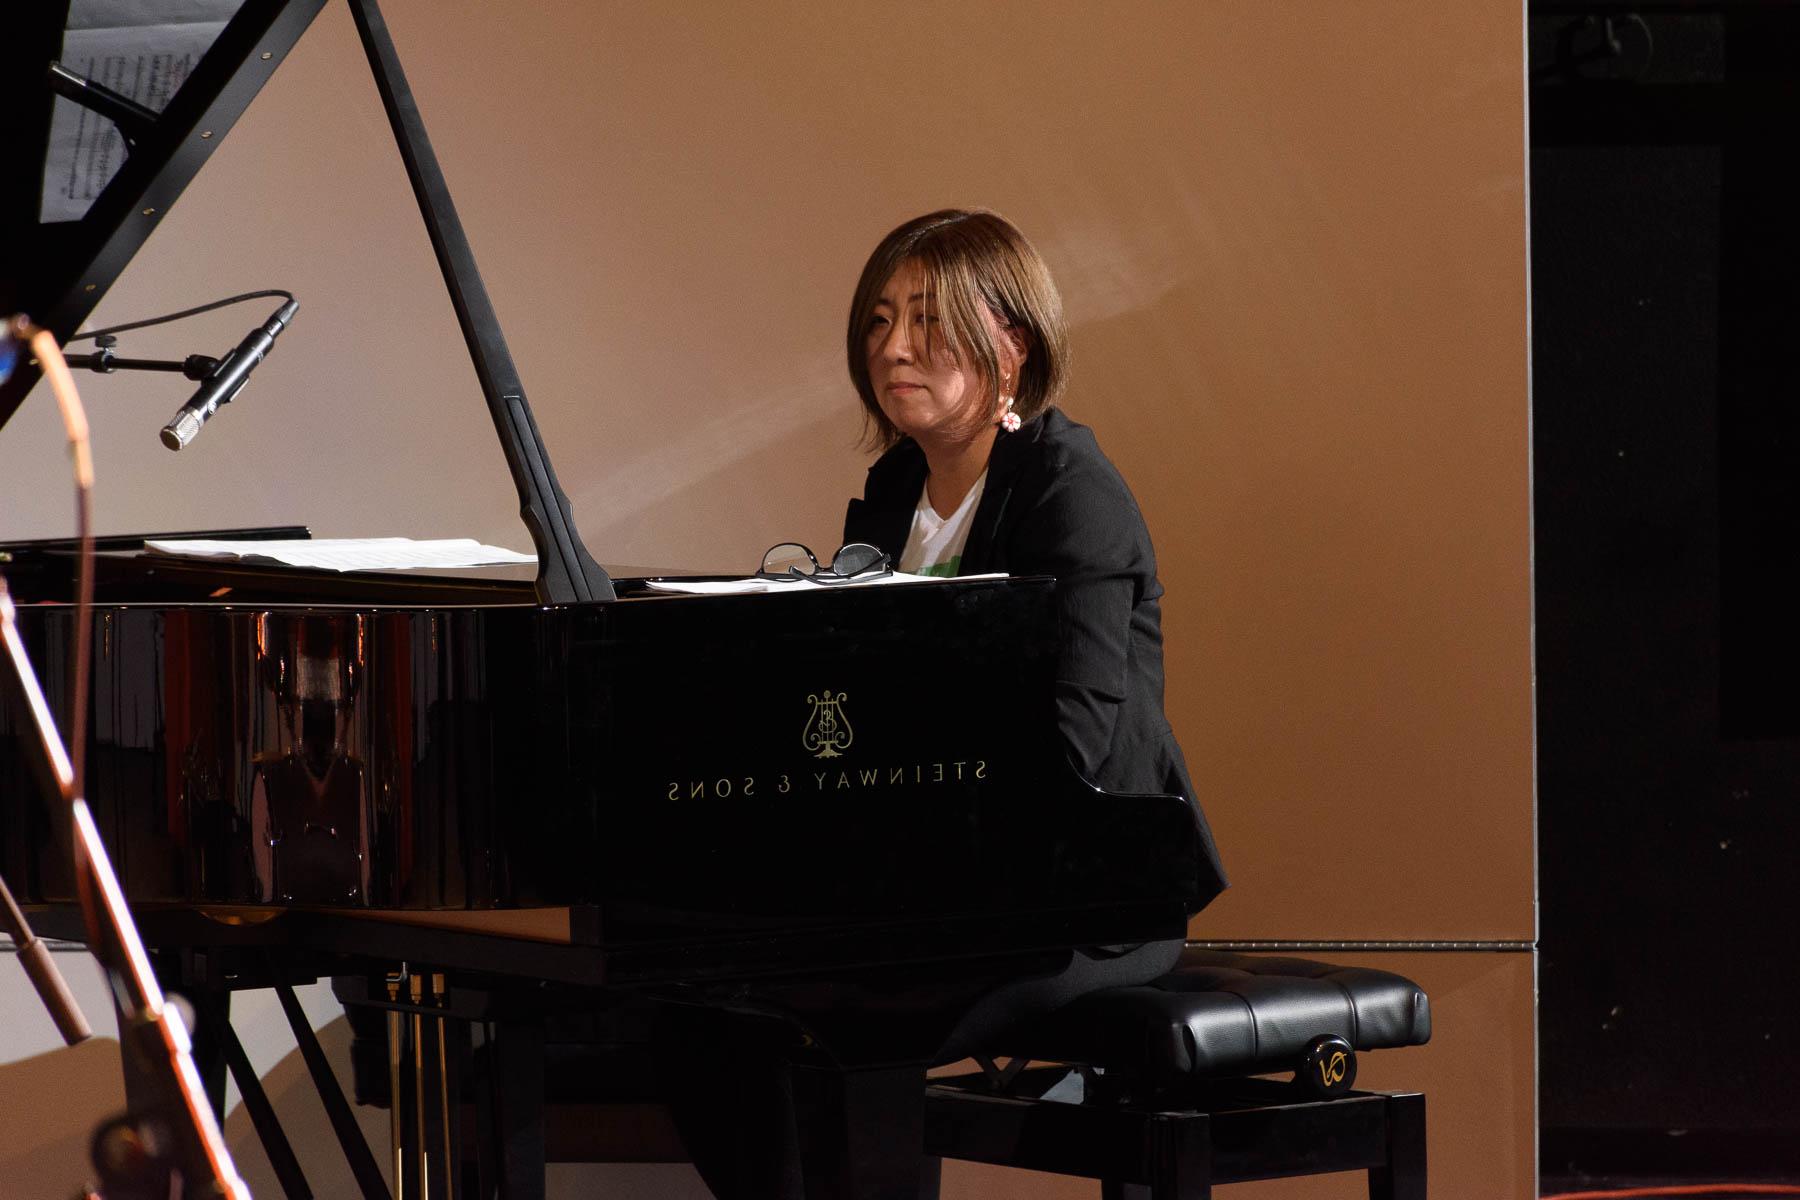 A female pianist is seen playing a Steinway grand piano.